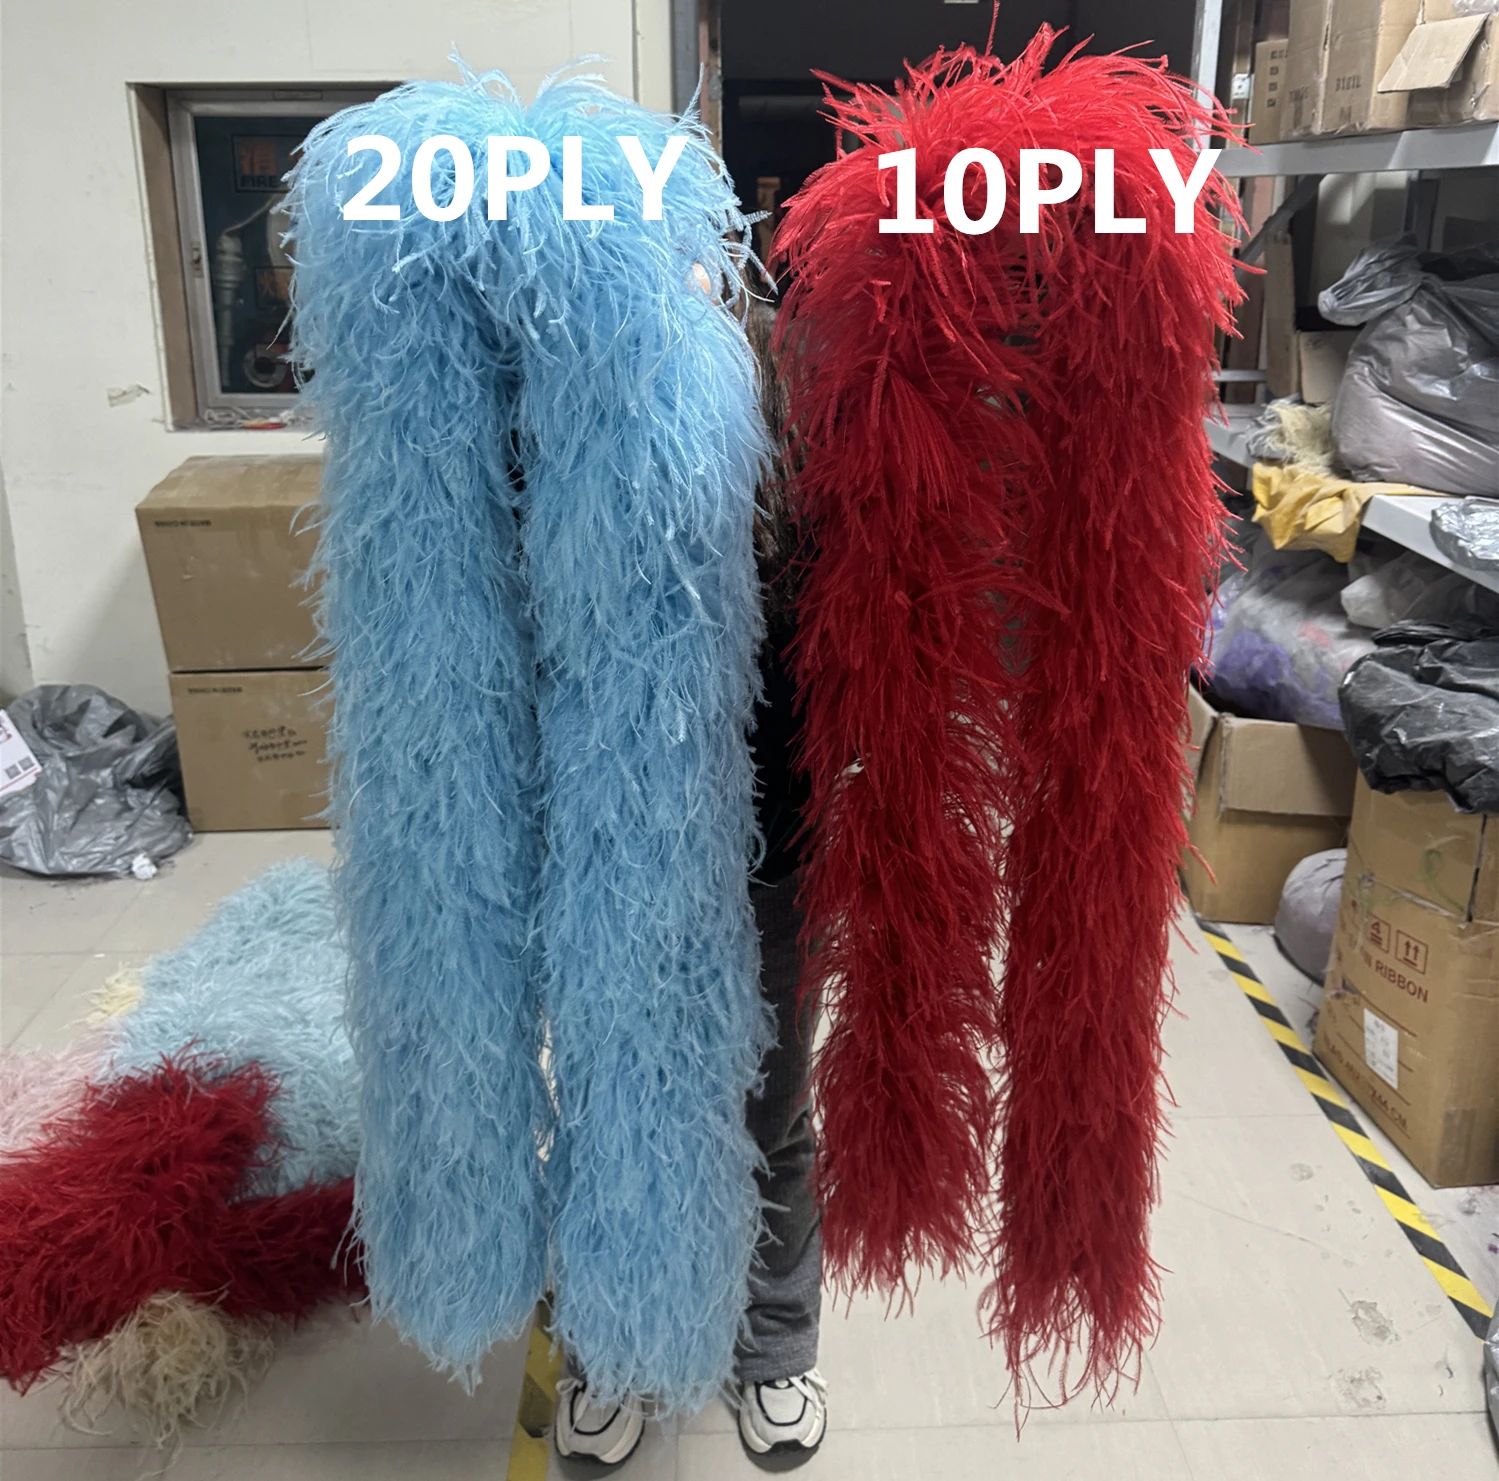 

10Ply 20Ply Fluffy Ostrich feathers boa Customized 0.5M 2M 3M Ostrich Feather Trims Plumas Decoration Dress Sewing Accessory